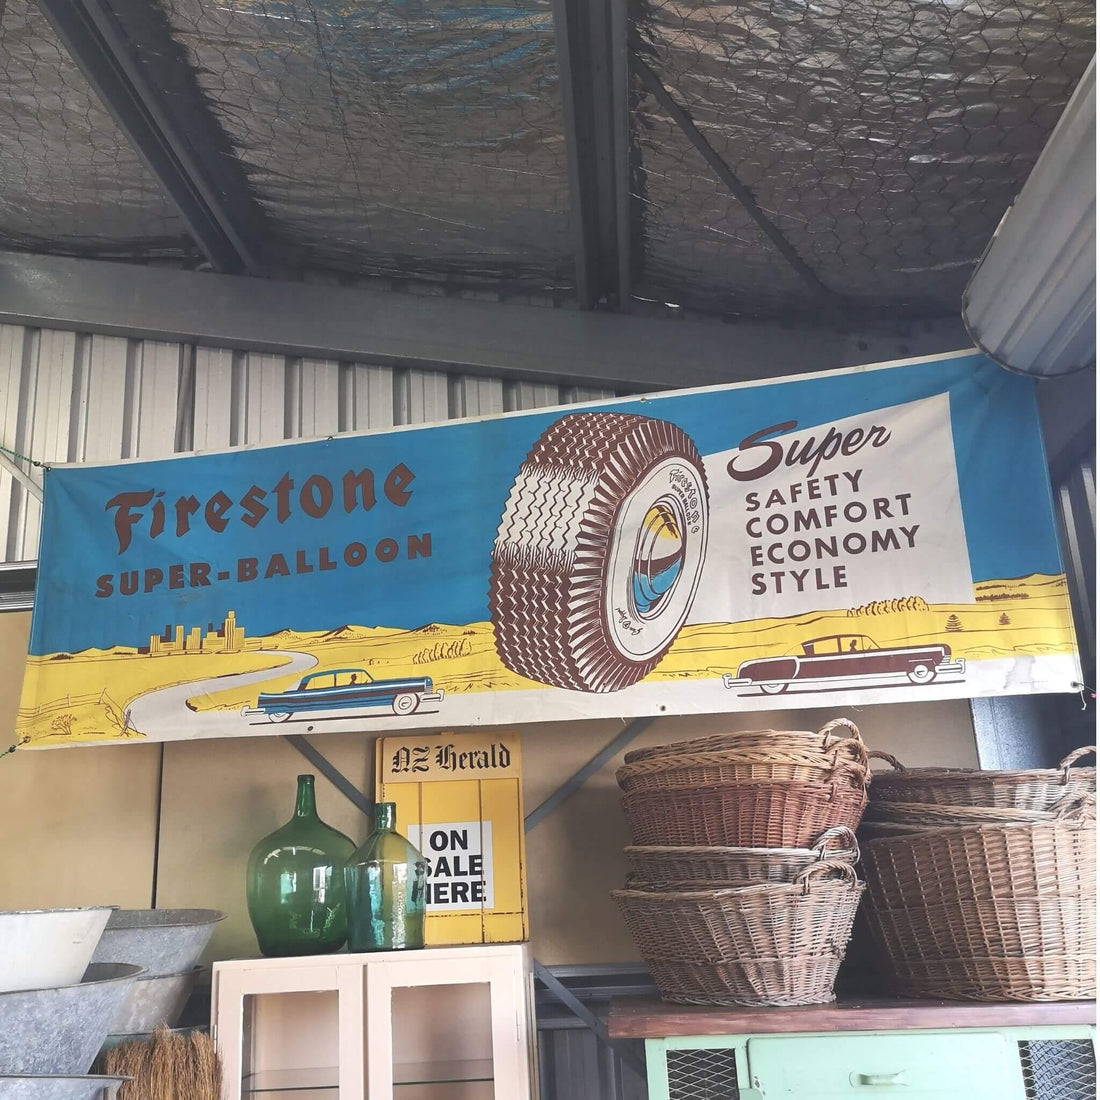 A large firestone tyres canvas banner